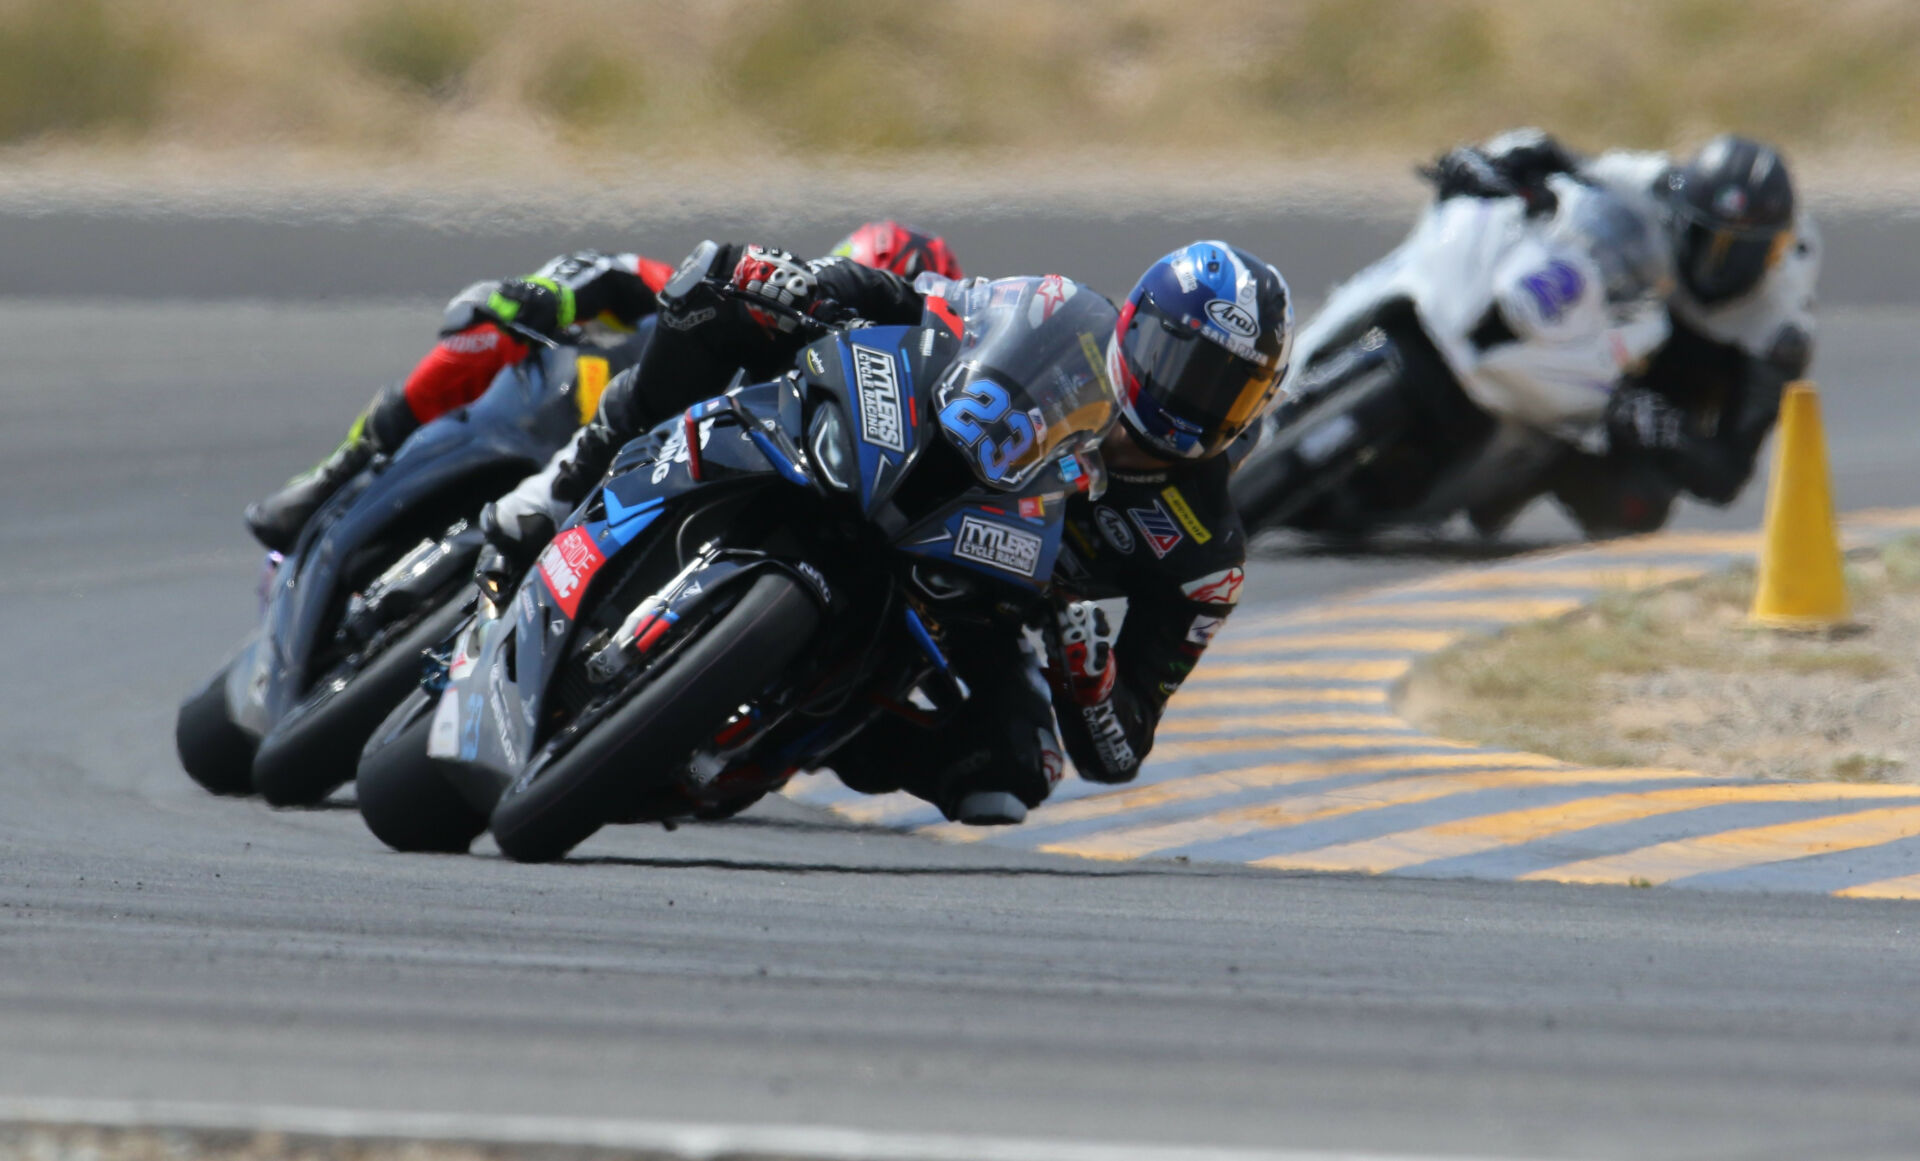 RideHVMC's Corey Alexander (23) leads David Anthony (25) and Anthony Norton (2) in the Stock 1000 Shootout. Photo by Caliphotography.com, courtesy CVMA.